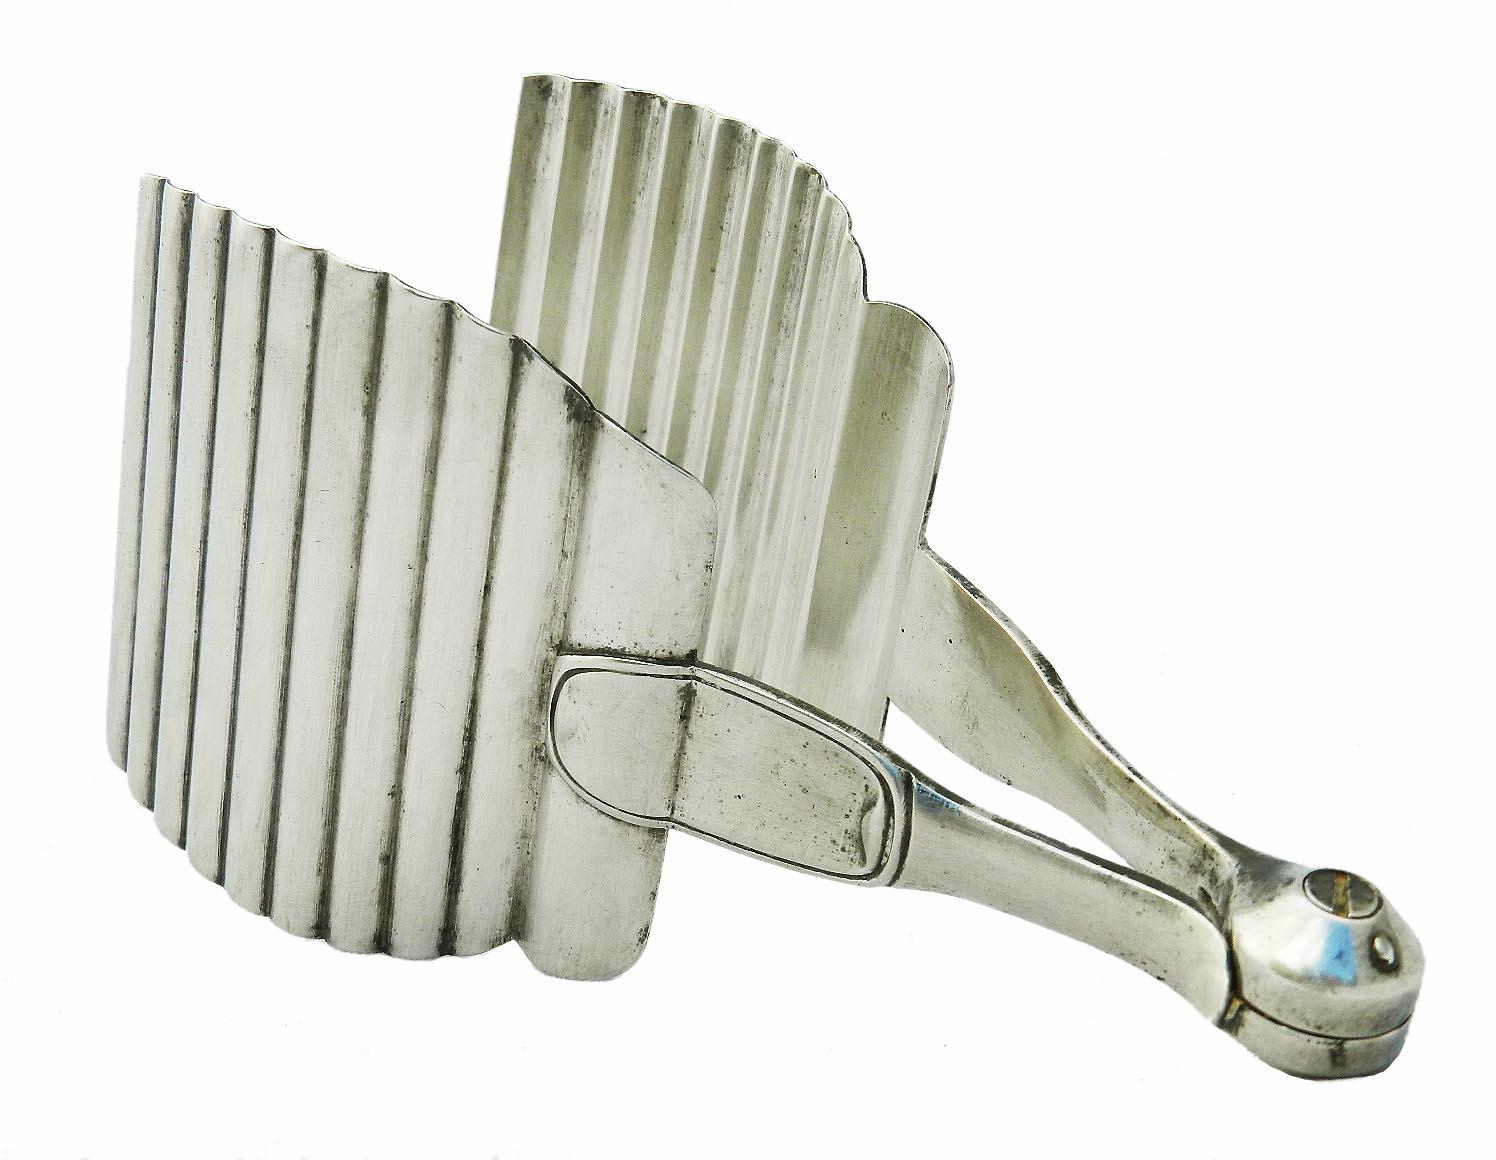 Art Deco Christofle Asparagus servers
Sprung grips or tongs
Cake or Sandwich servers
Marked Christofle renowned for its superb quality silver plate
Good vintage condition in good working order.


  